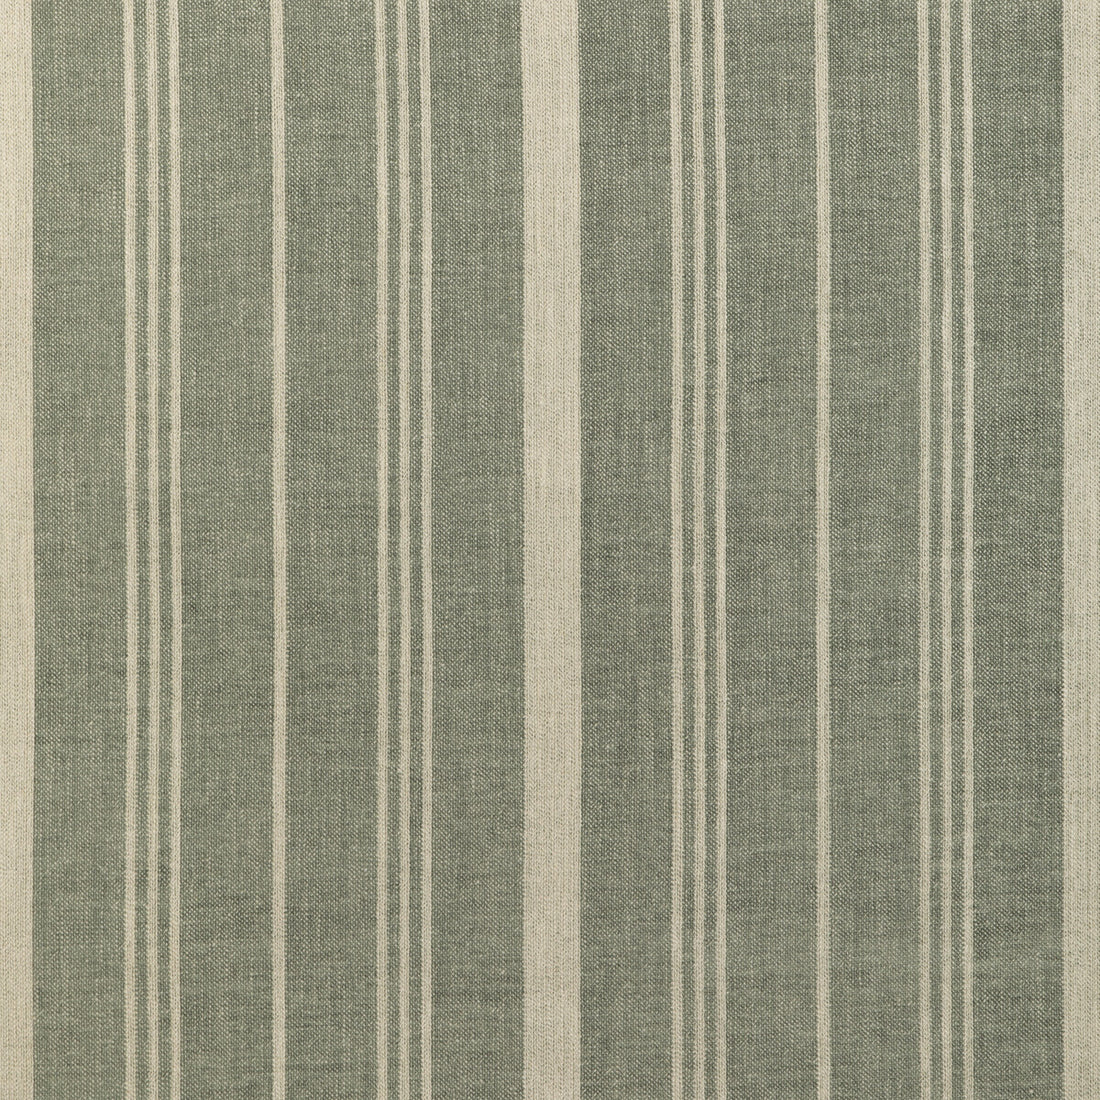 Furrow Stripe fabric in sage color - pattern 36902.130.0 - by Kravet Couture in the Atelier Weaves collection